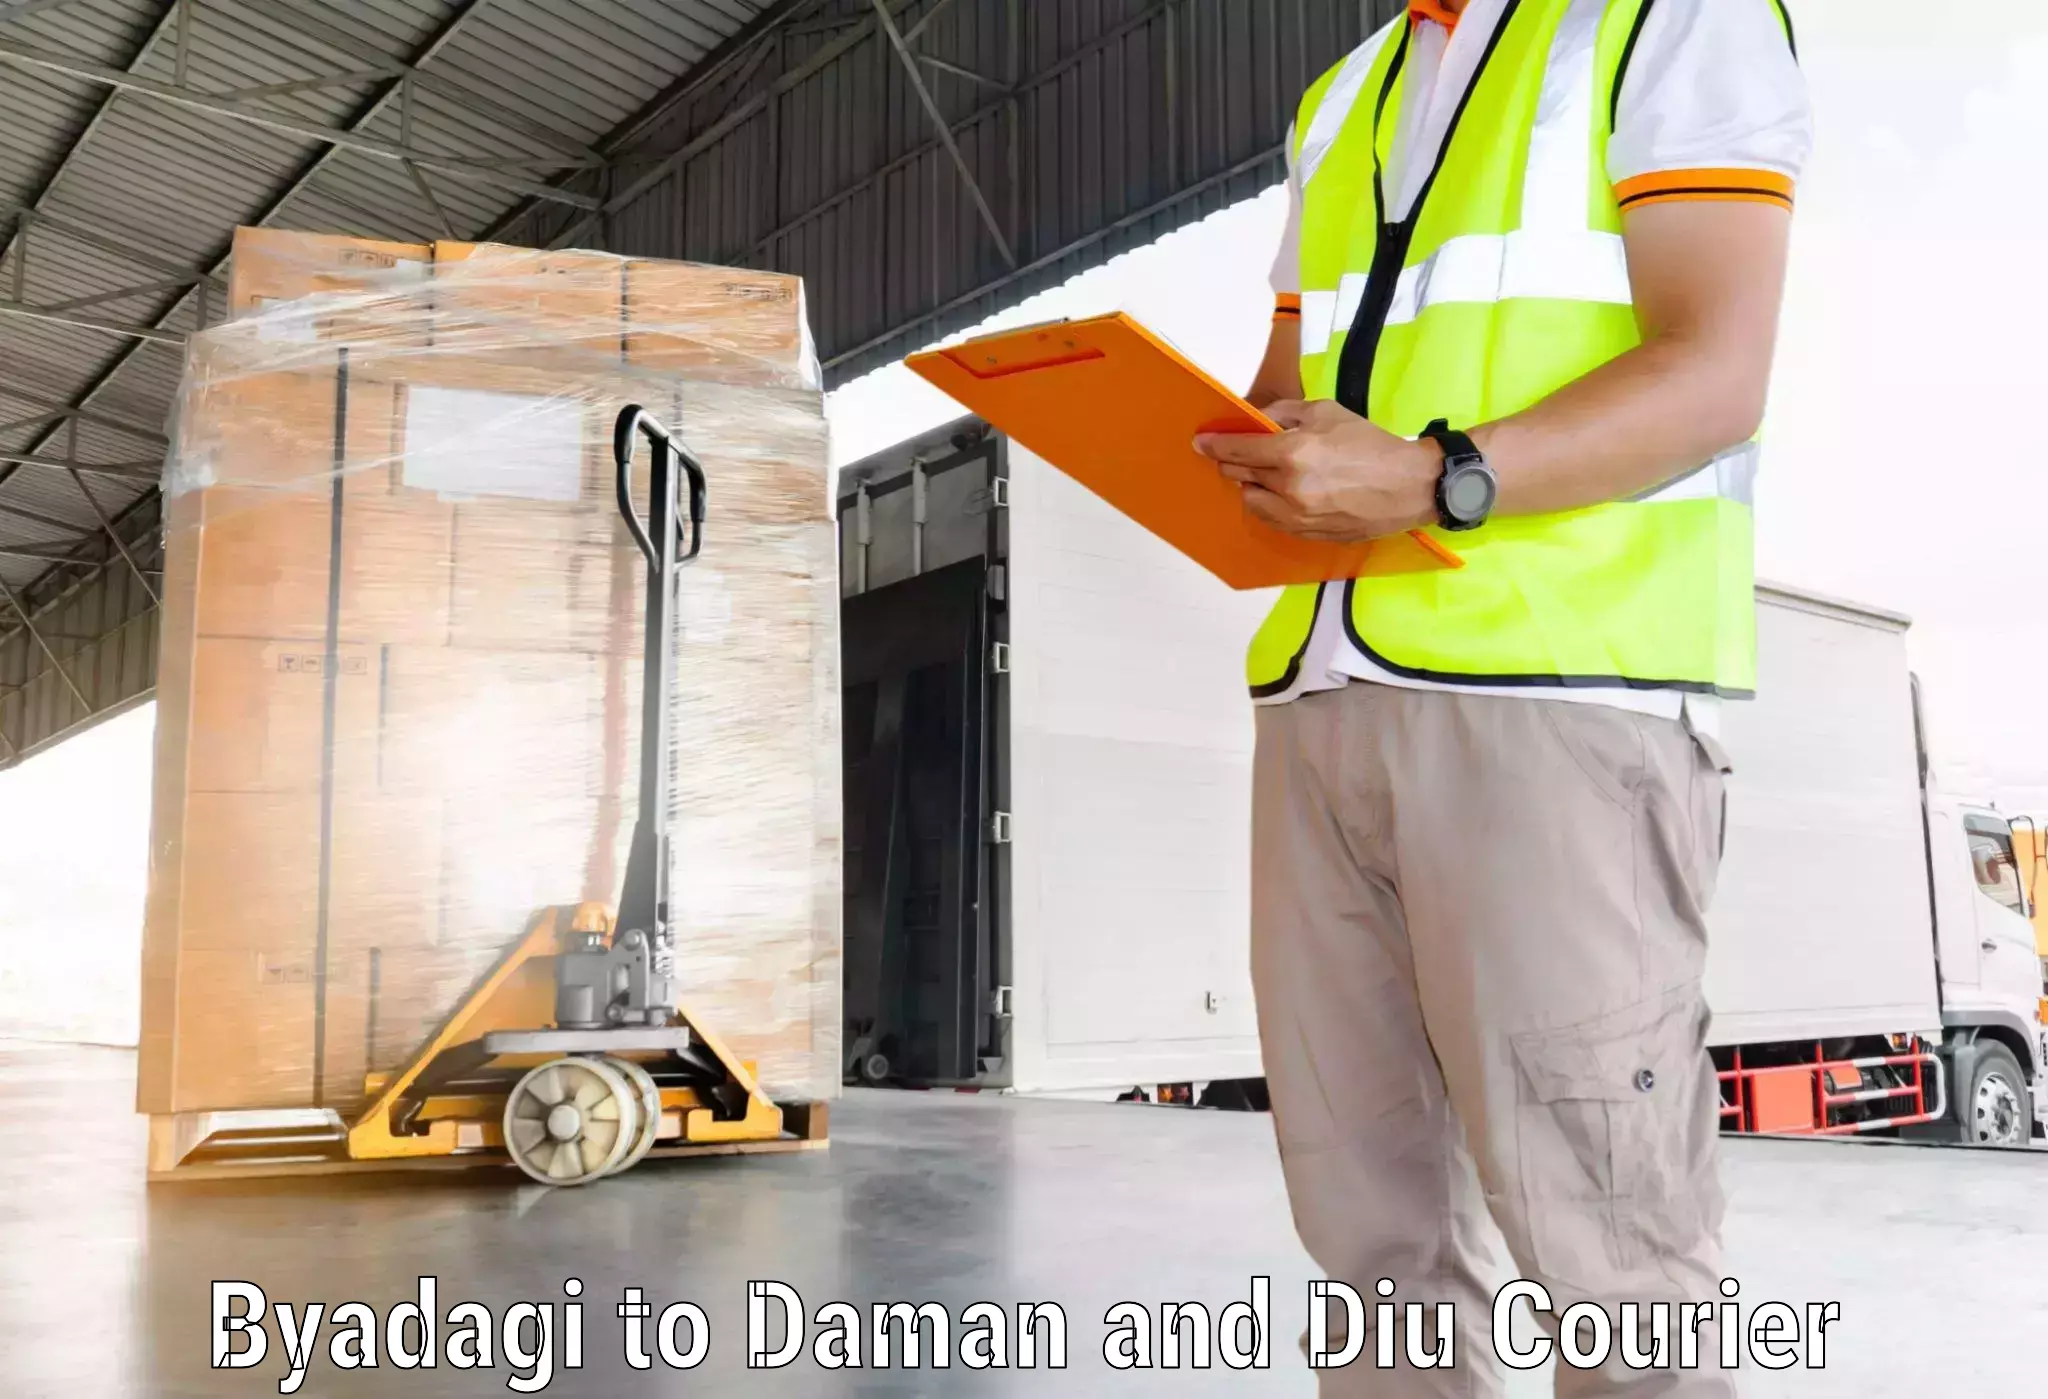 Multi-national courier services Byadagi to Daman and Diu